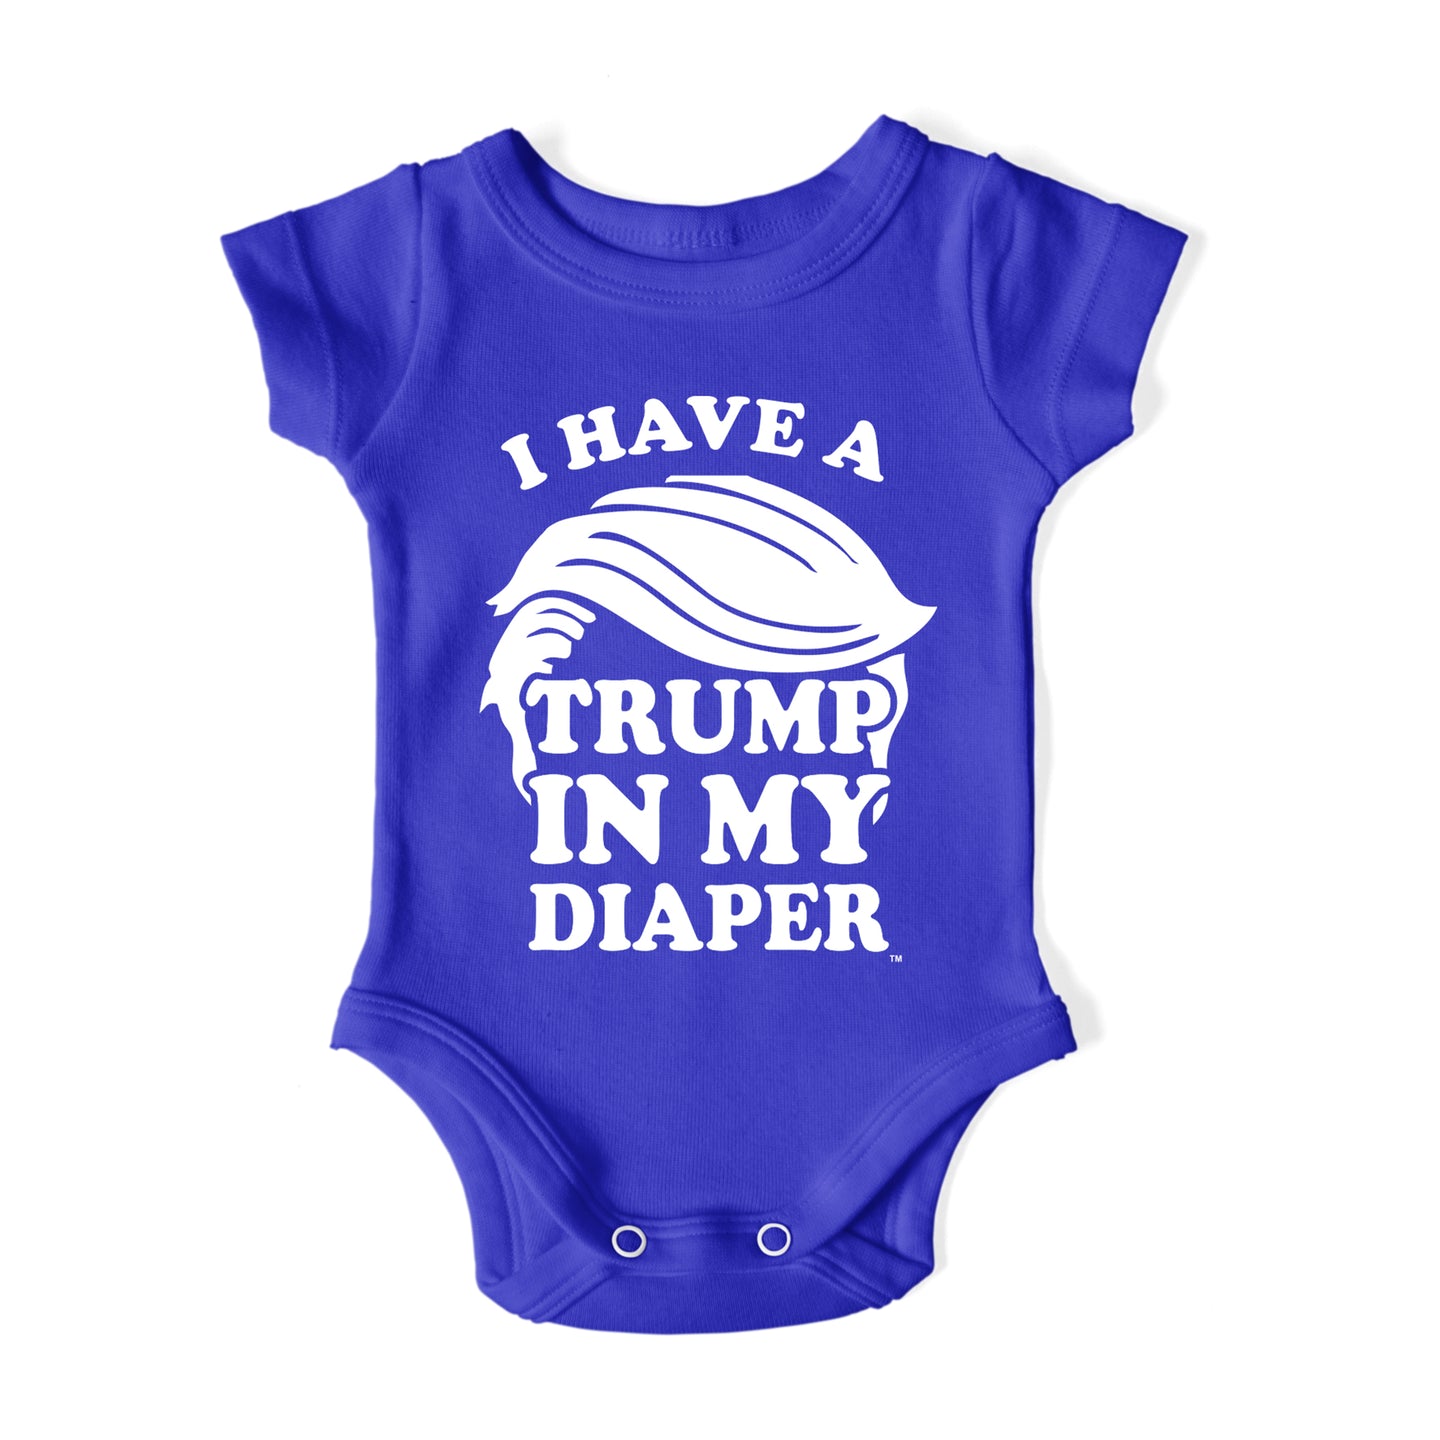 I HAVE A TRUMP IN MY DIAPER Baby One Piece